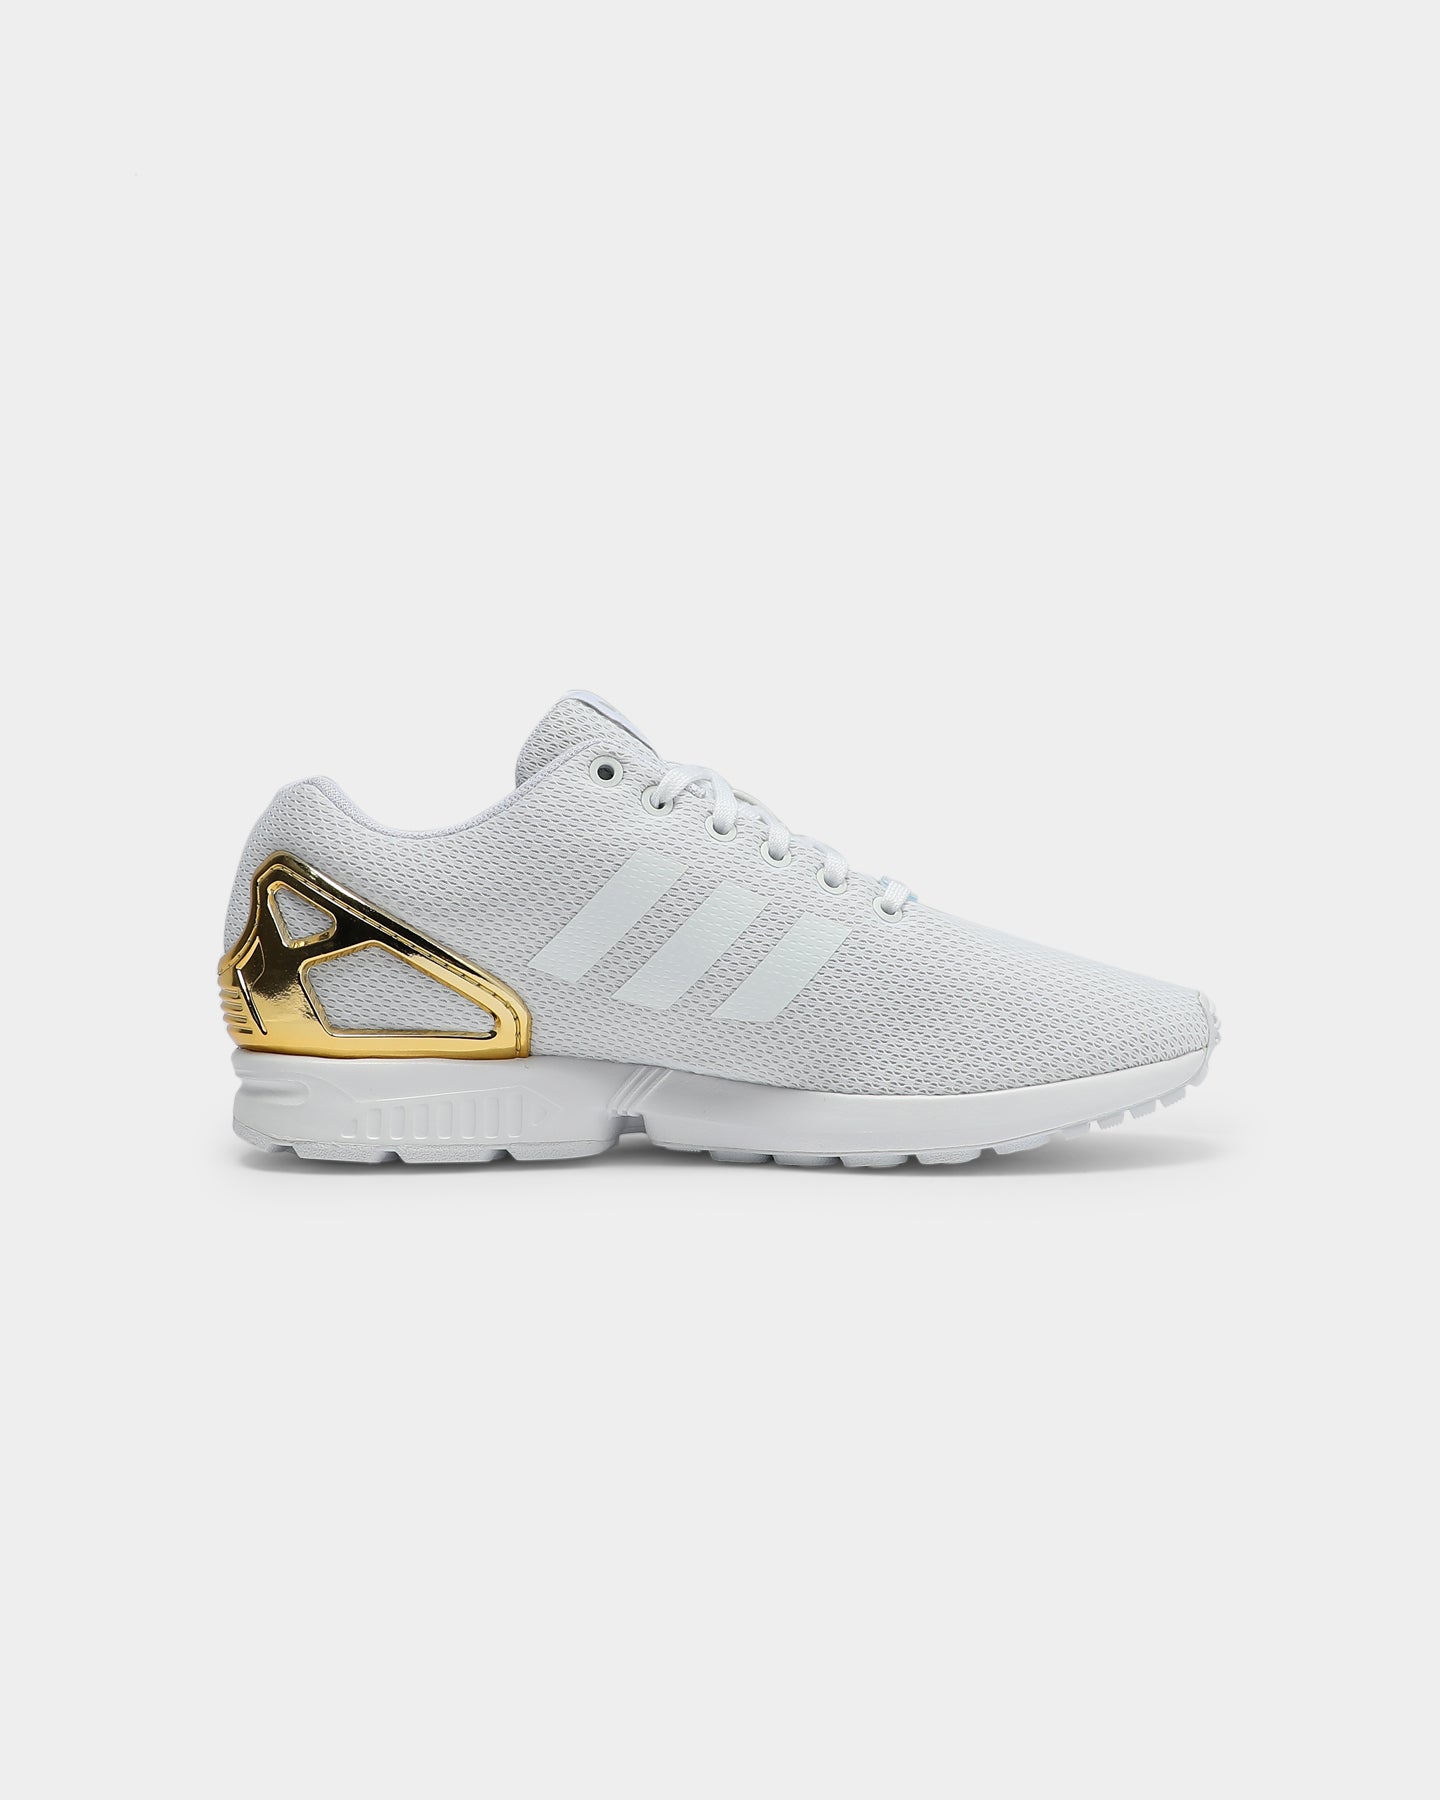 adidas zx flux with gold bottom